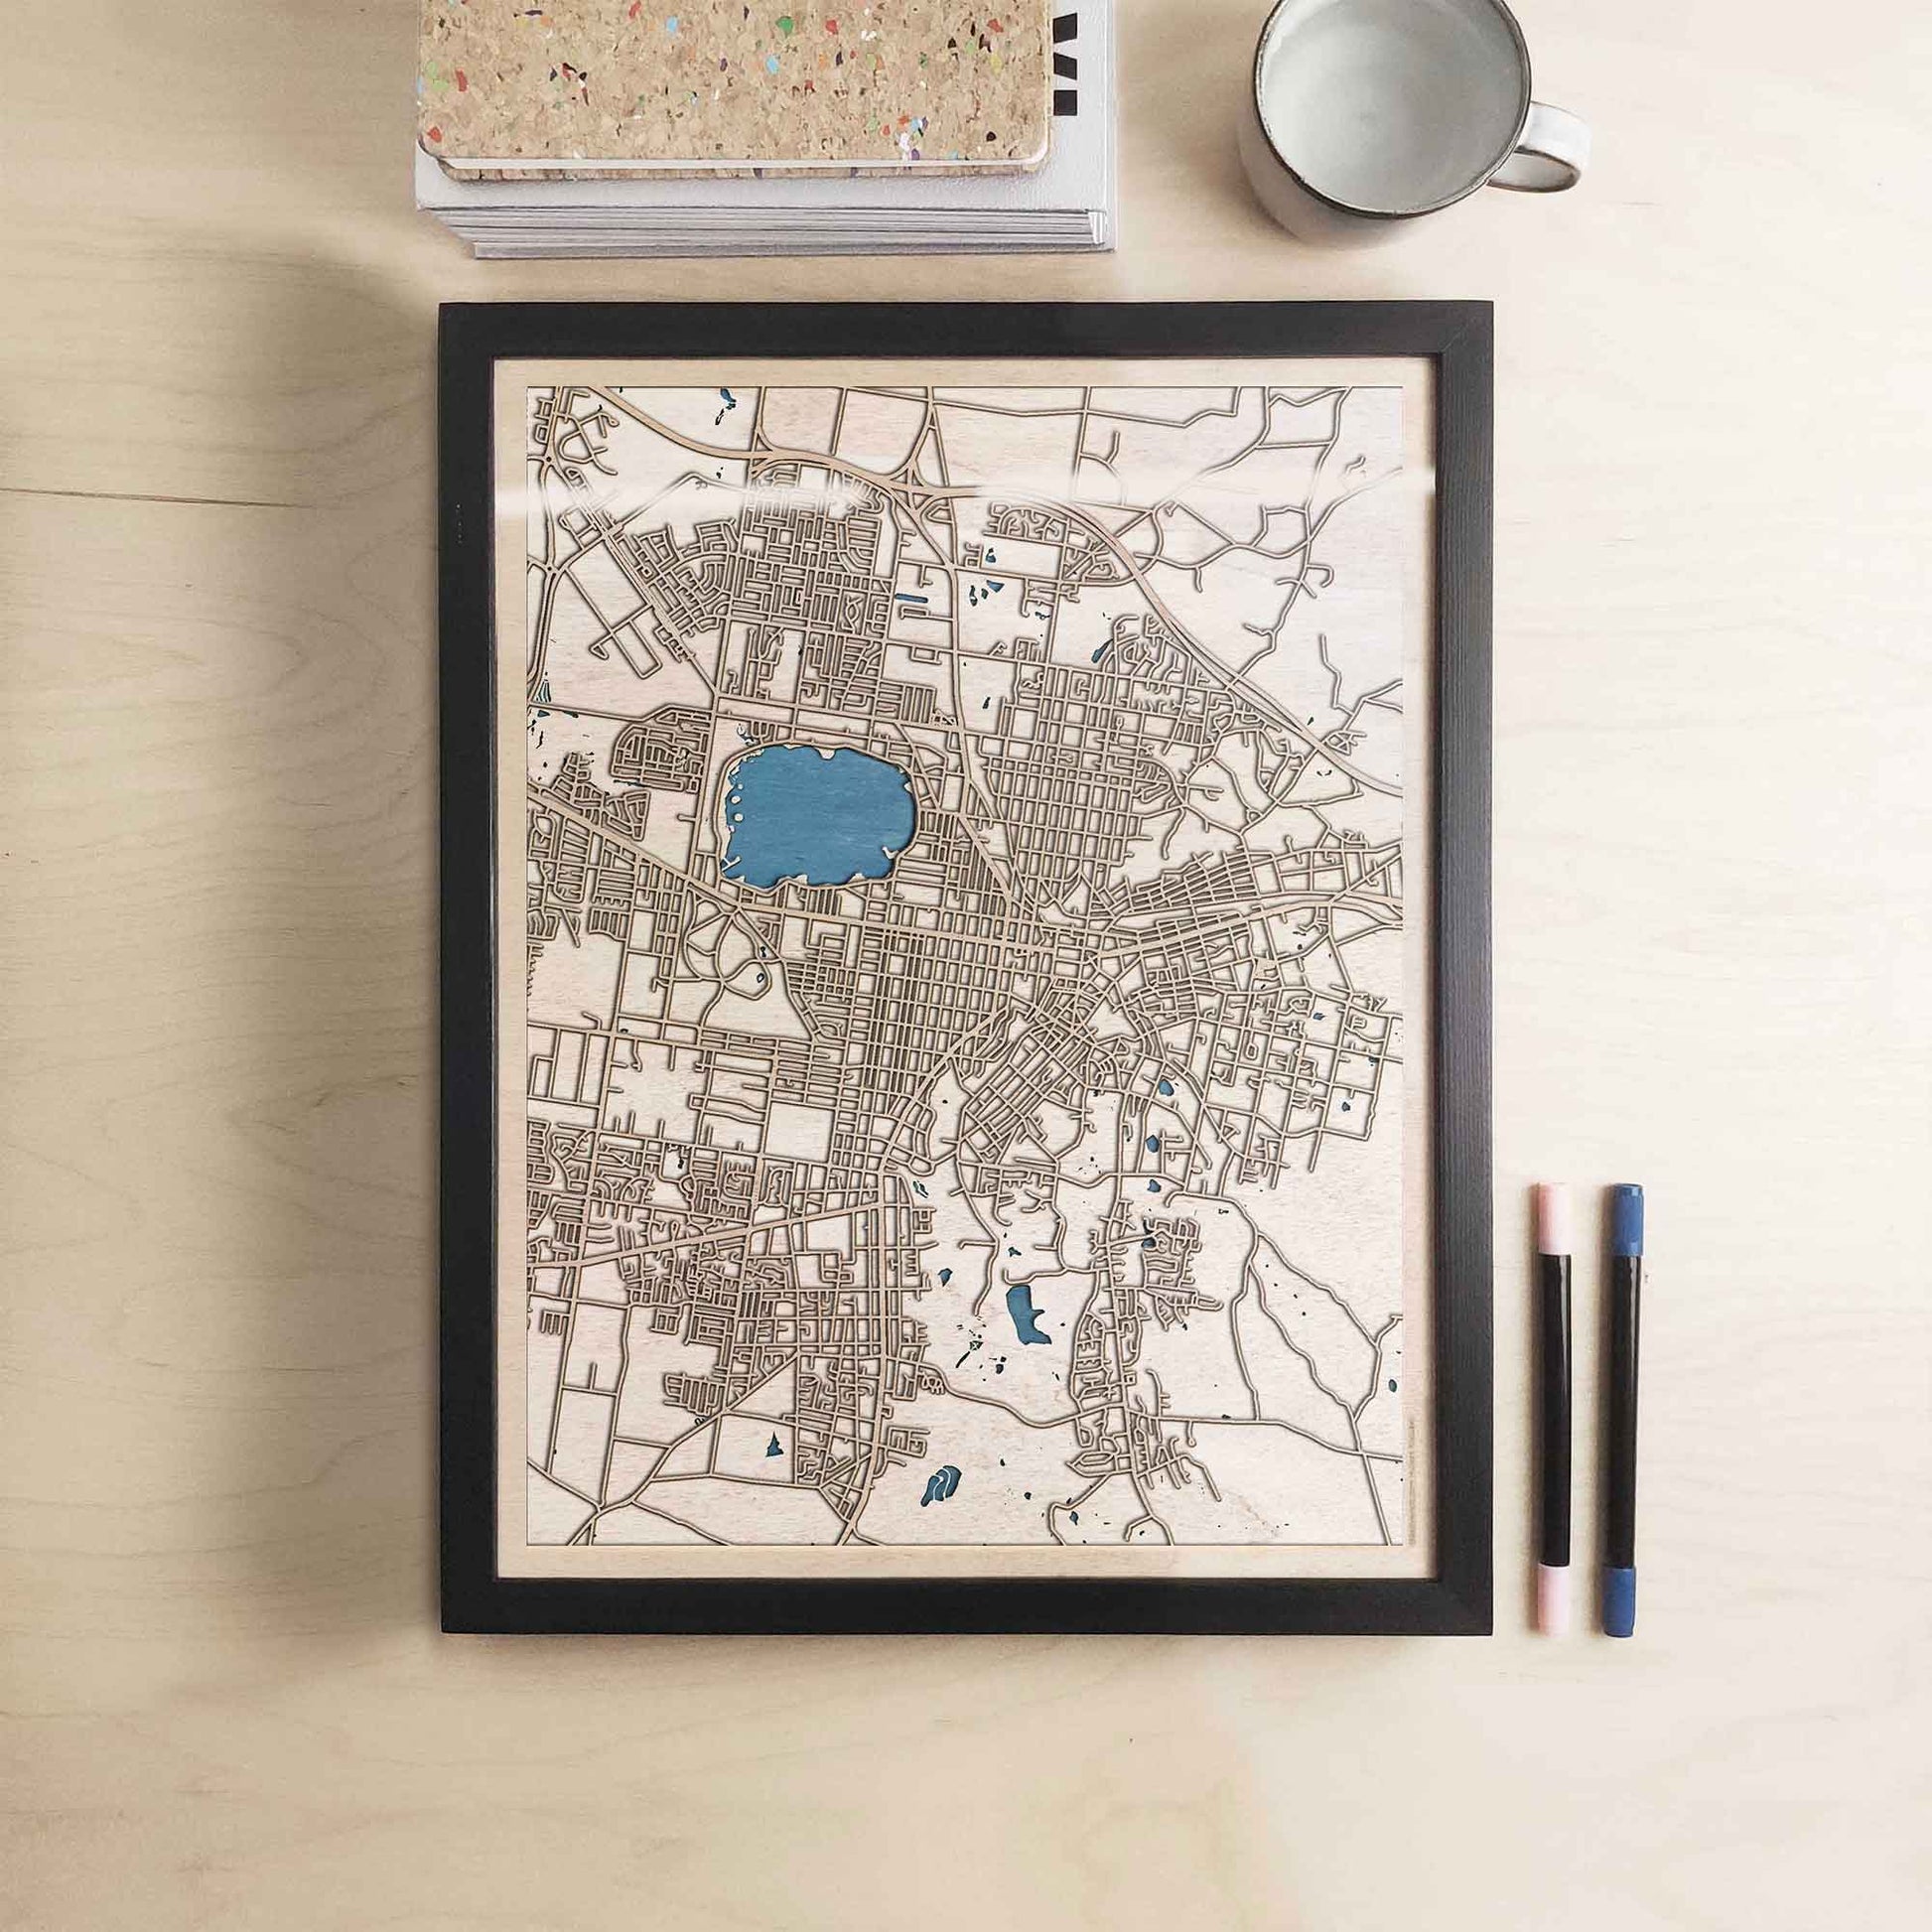 Ballarat Wooden Map by CityWood - Custom Wood Map Art - Unique Laser Cut Engraved - Anniversary Gift